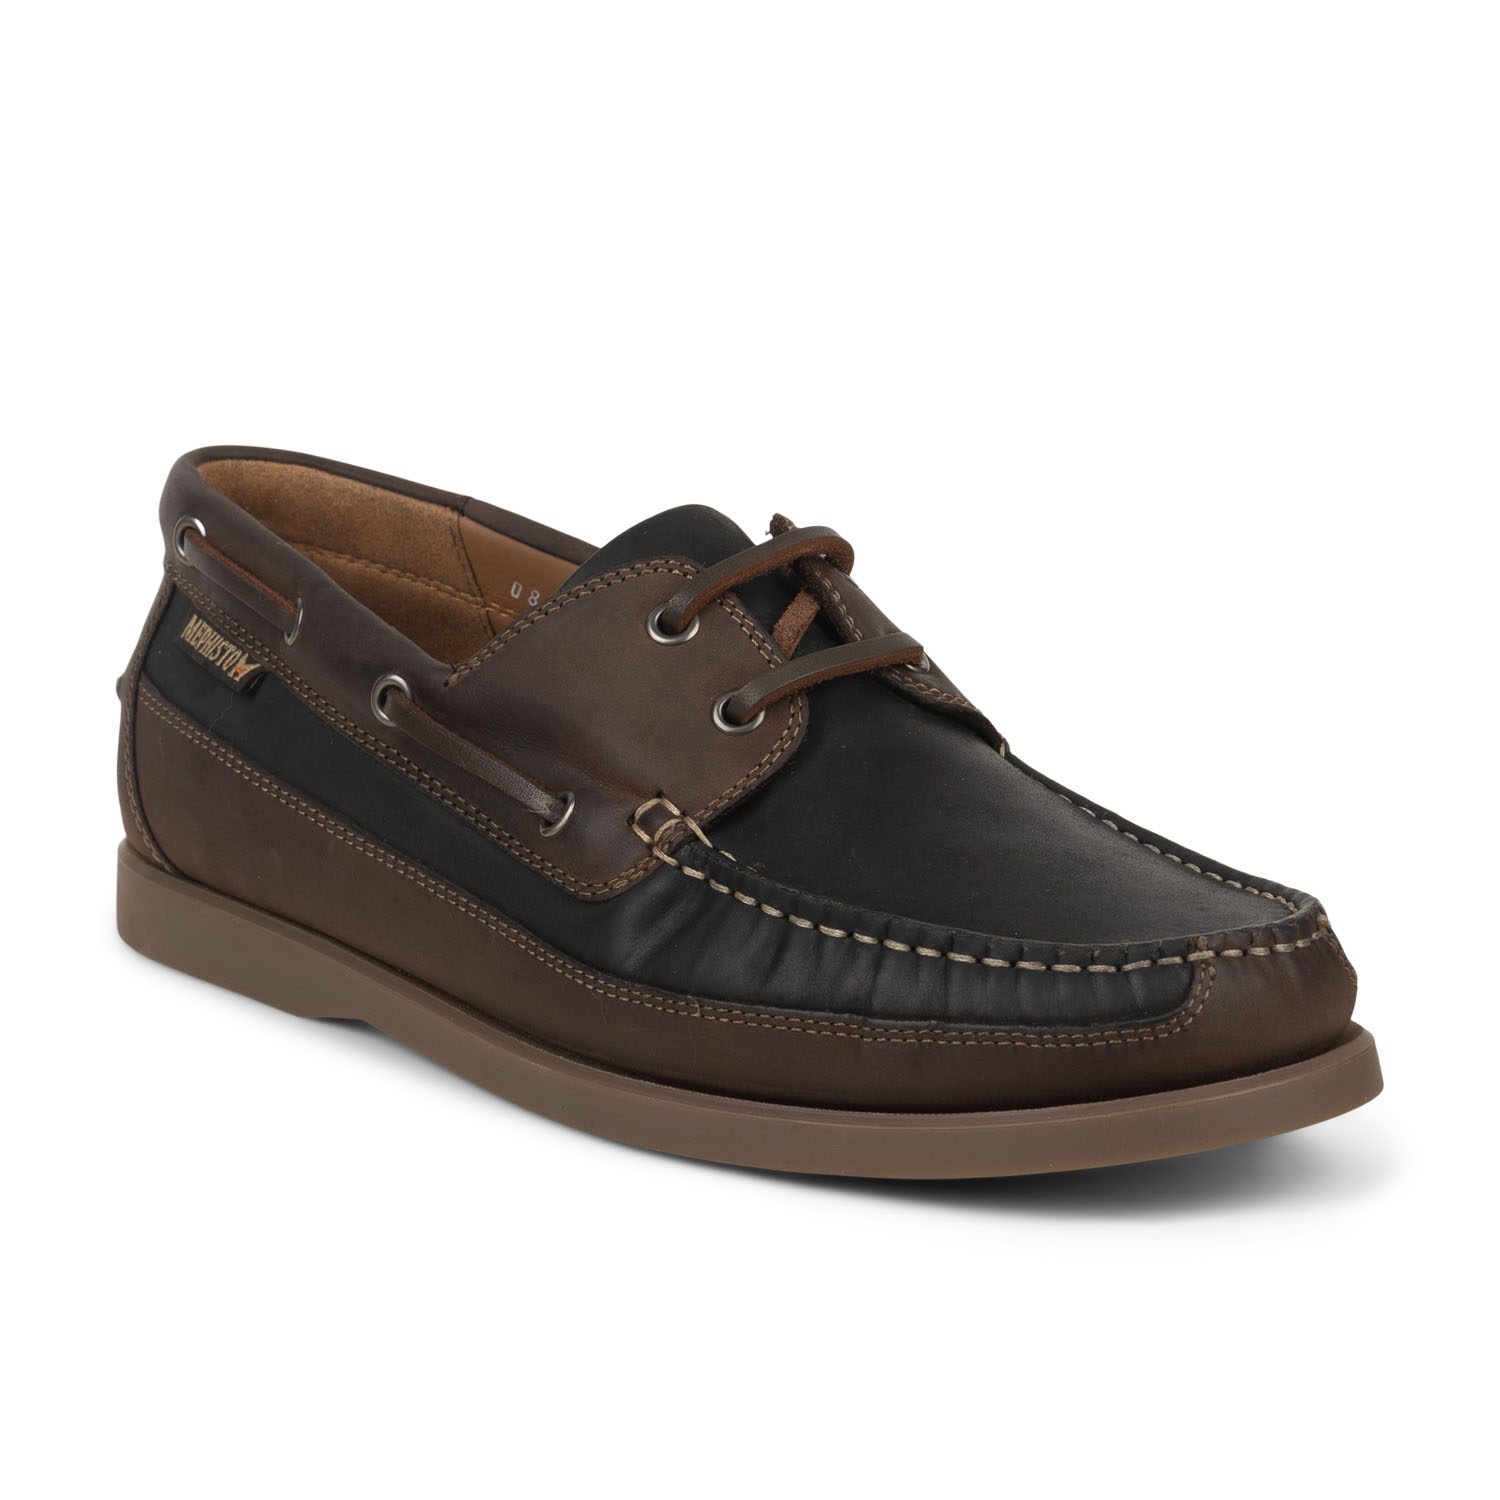 02 - BOATING - MEPHISTO - Chaussures bateau - Cuir